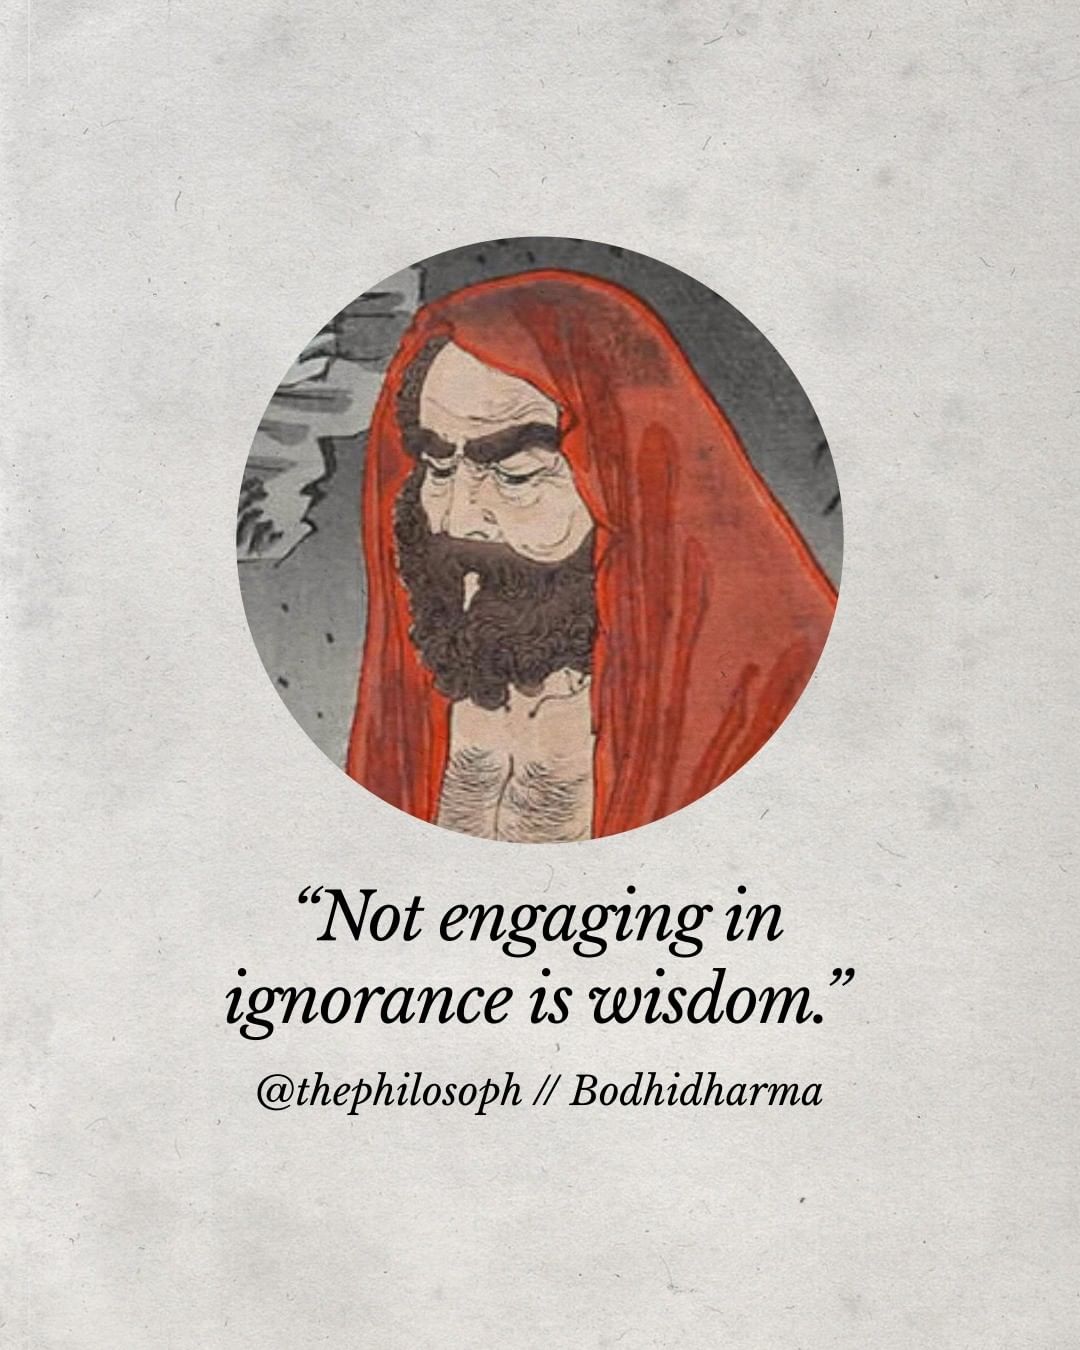 Not engaging in ignorance is wisdom.